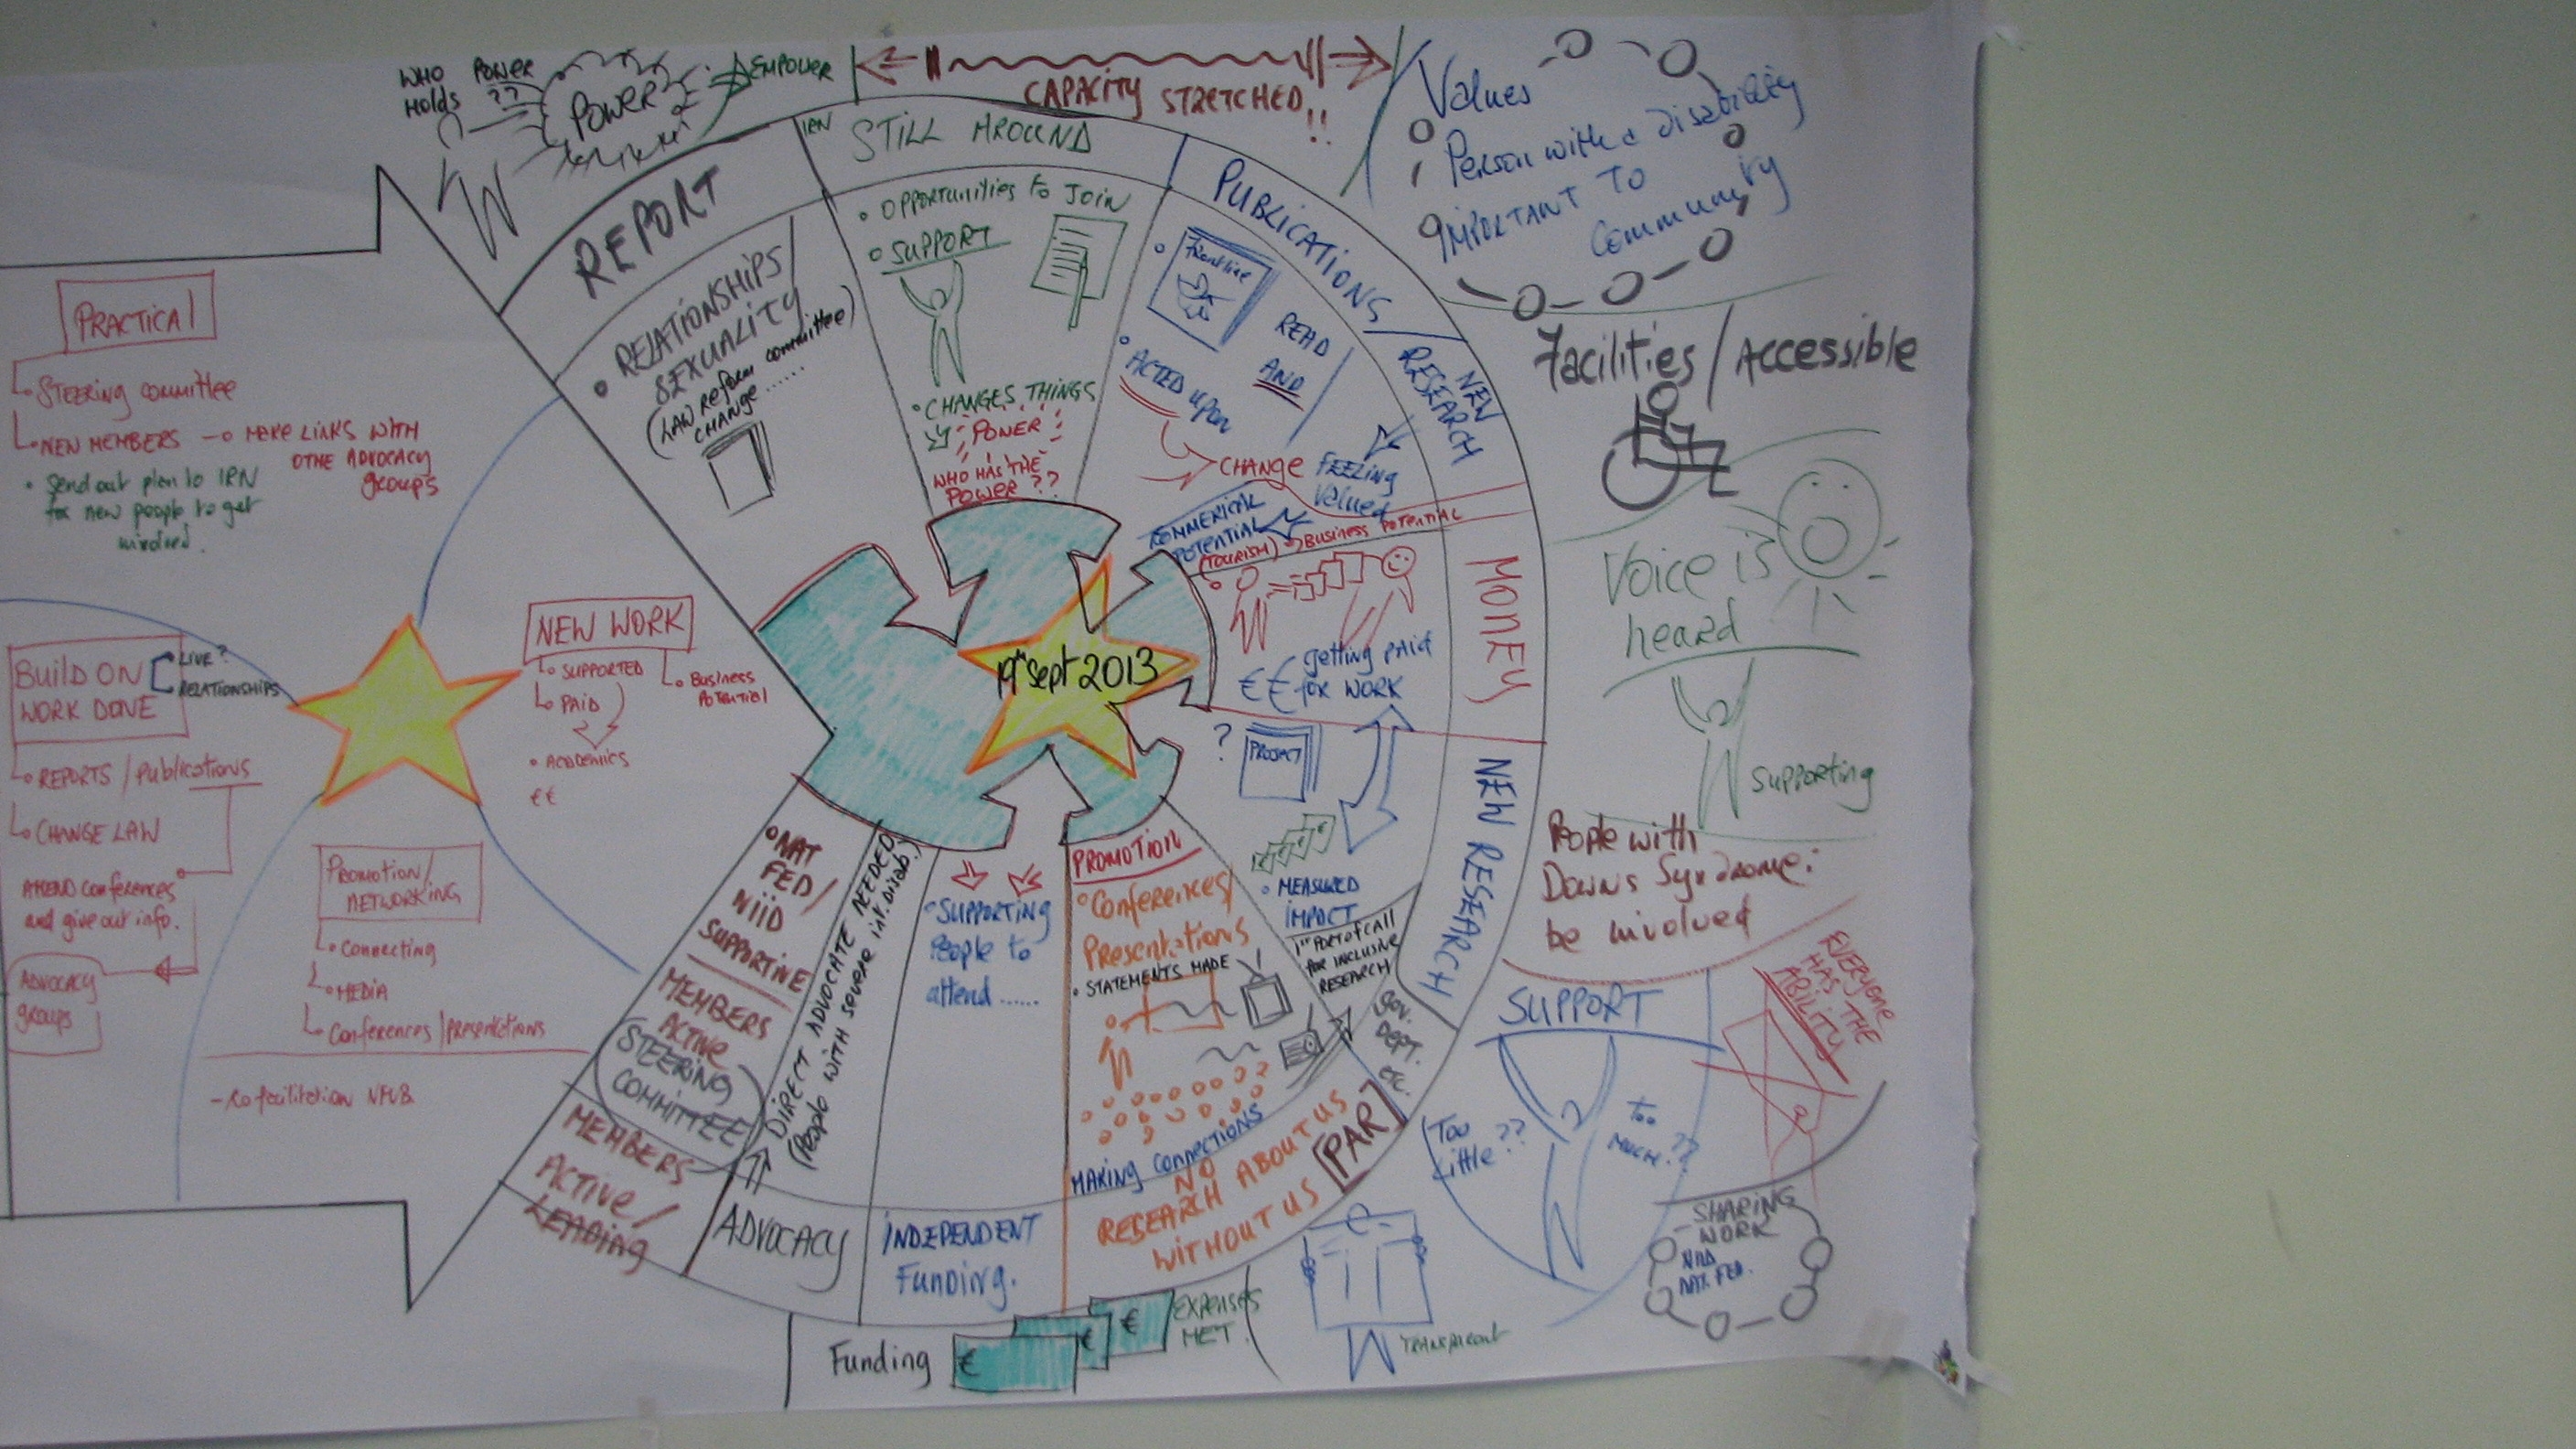 Part of the PATH chart from the meeting at Trinity College. The drawings explain the words on the PATH chart